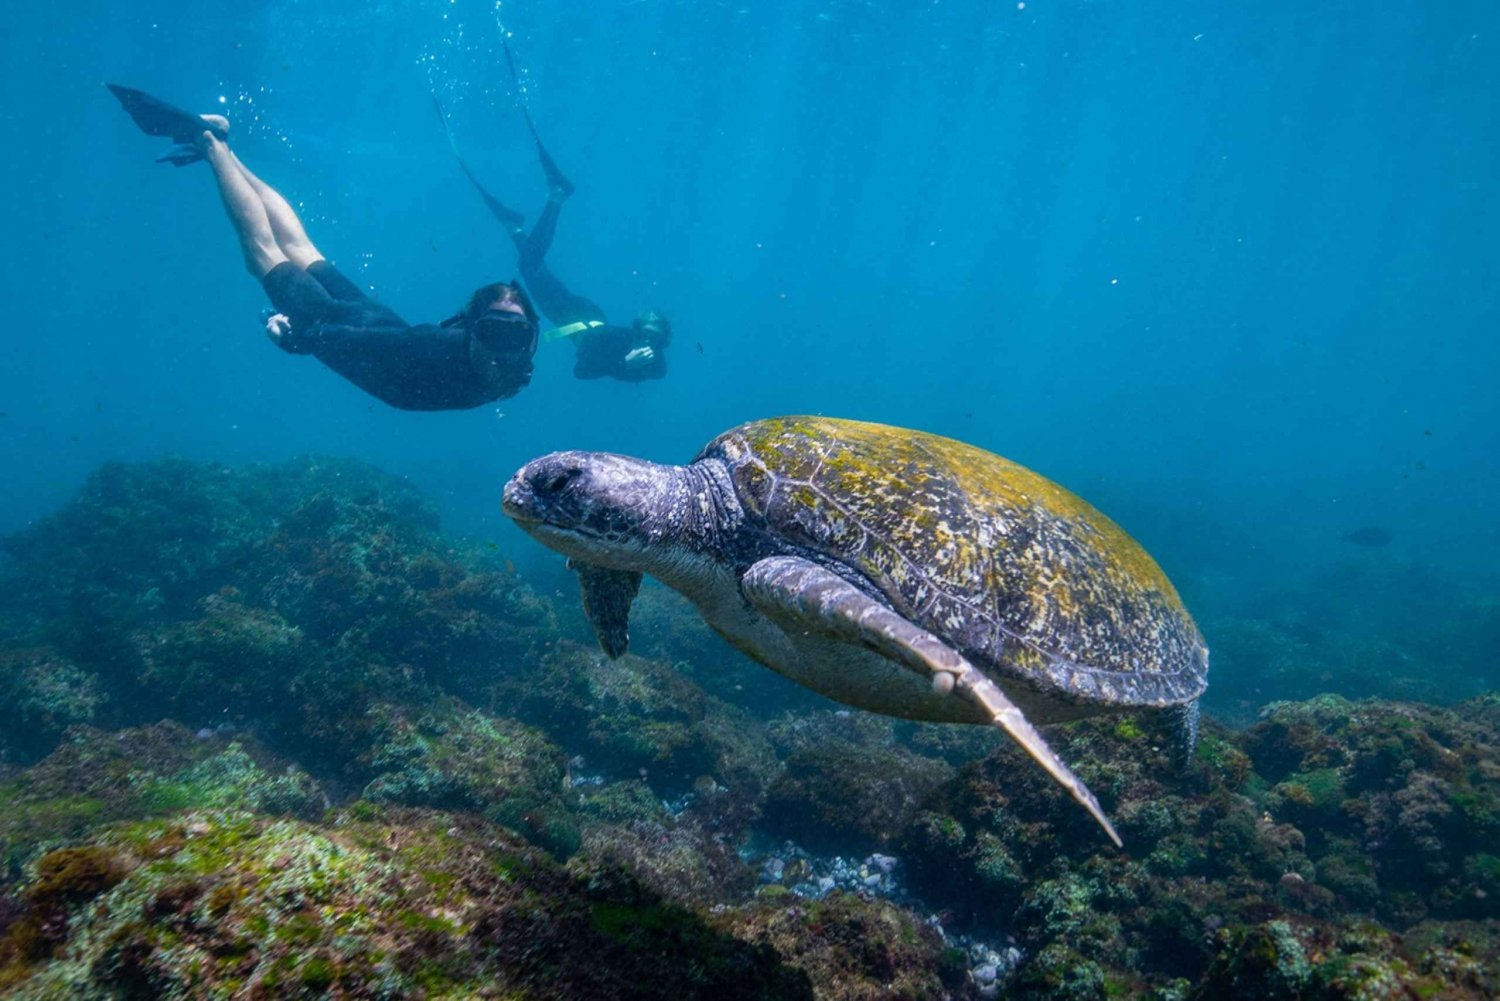 Gold Coast: Snorkeling with Turtles Half-Day Tour